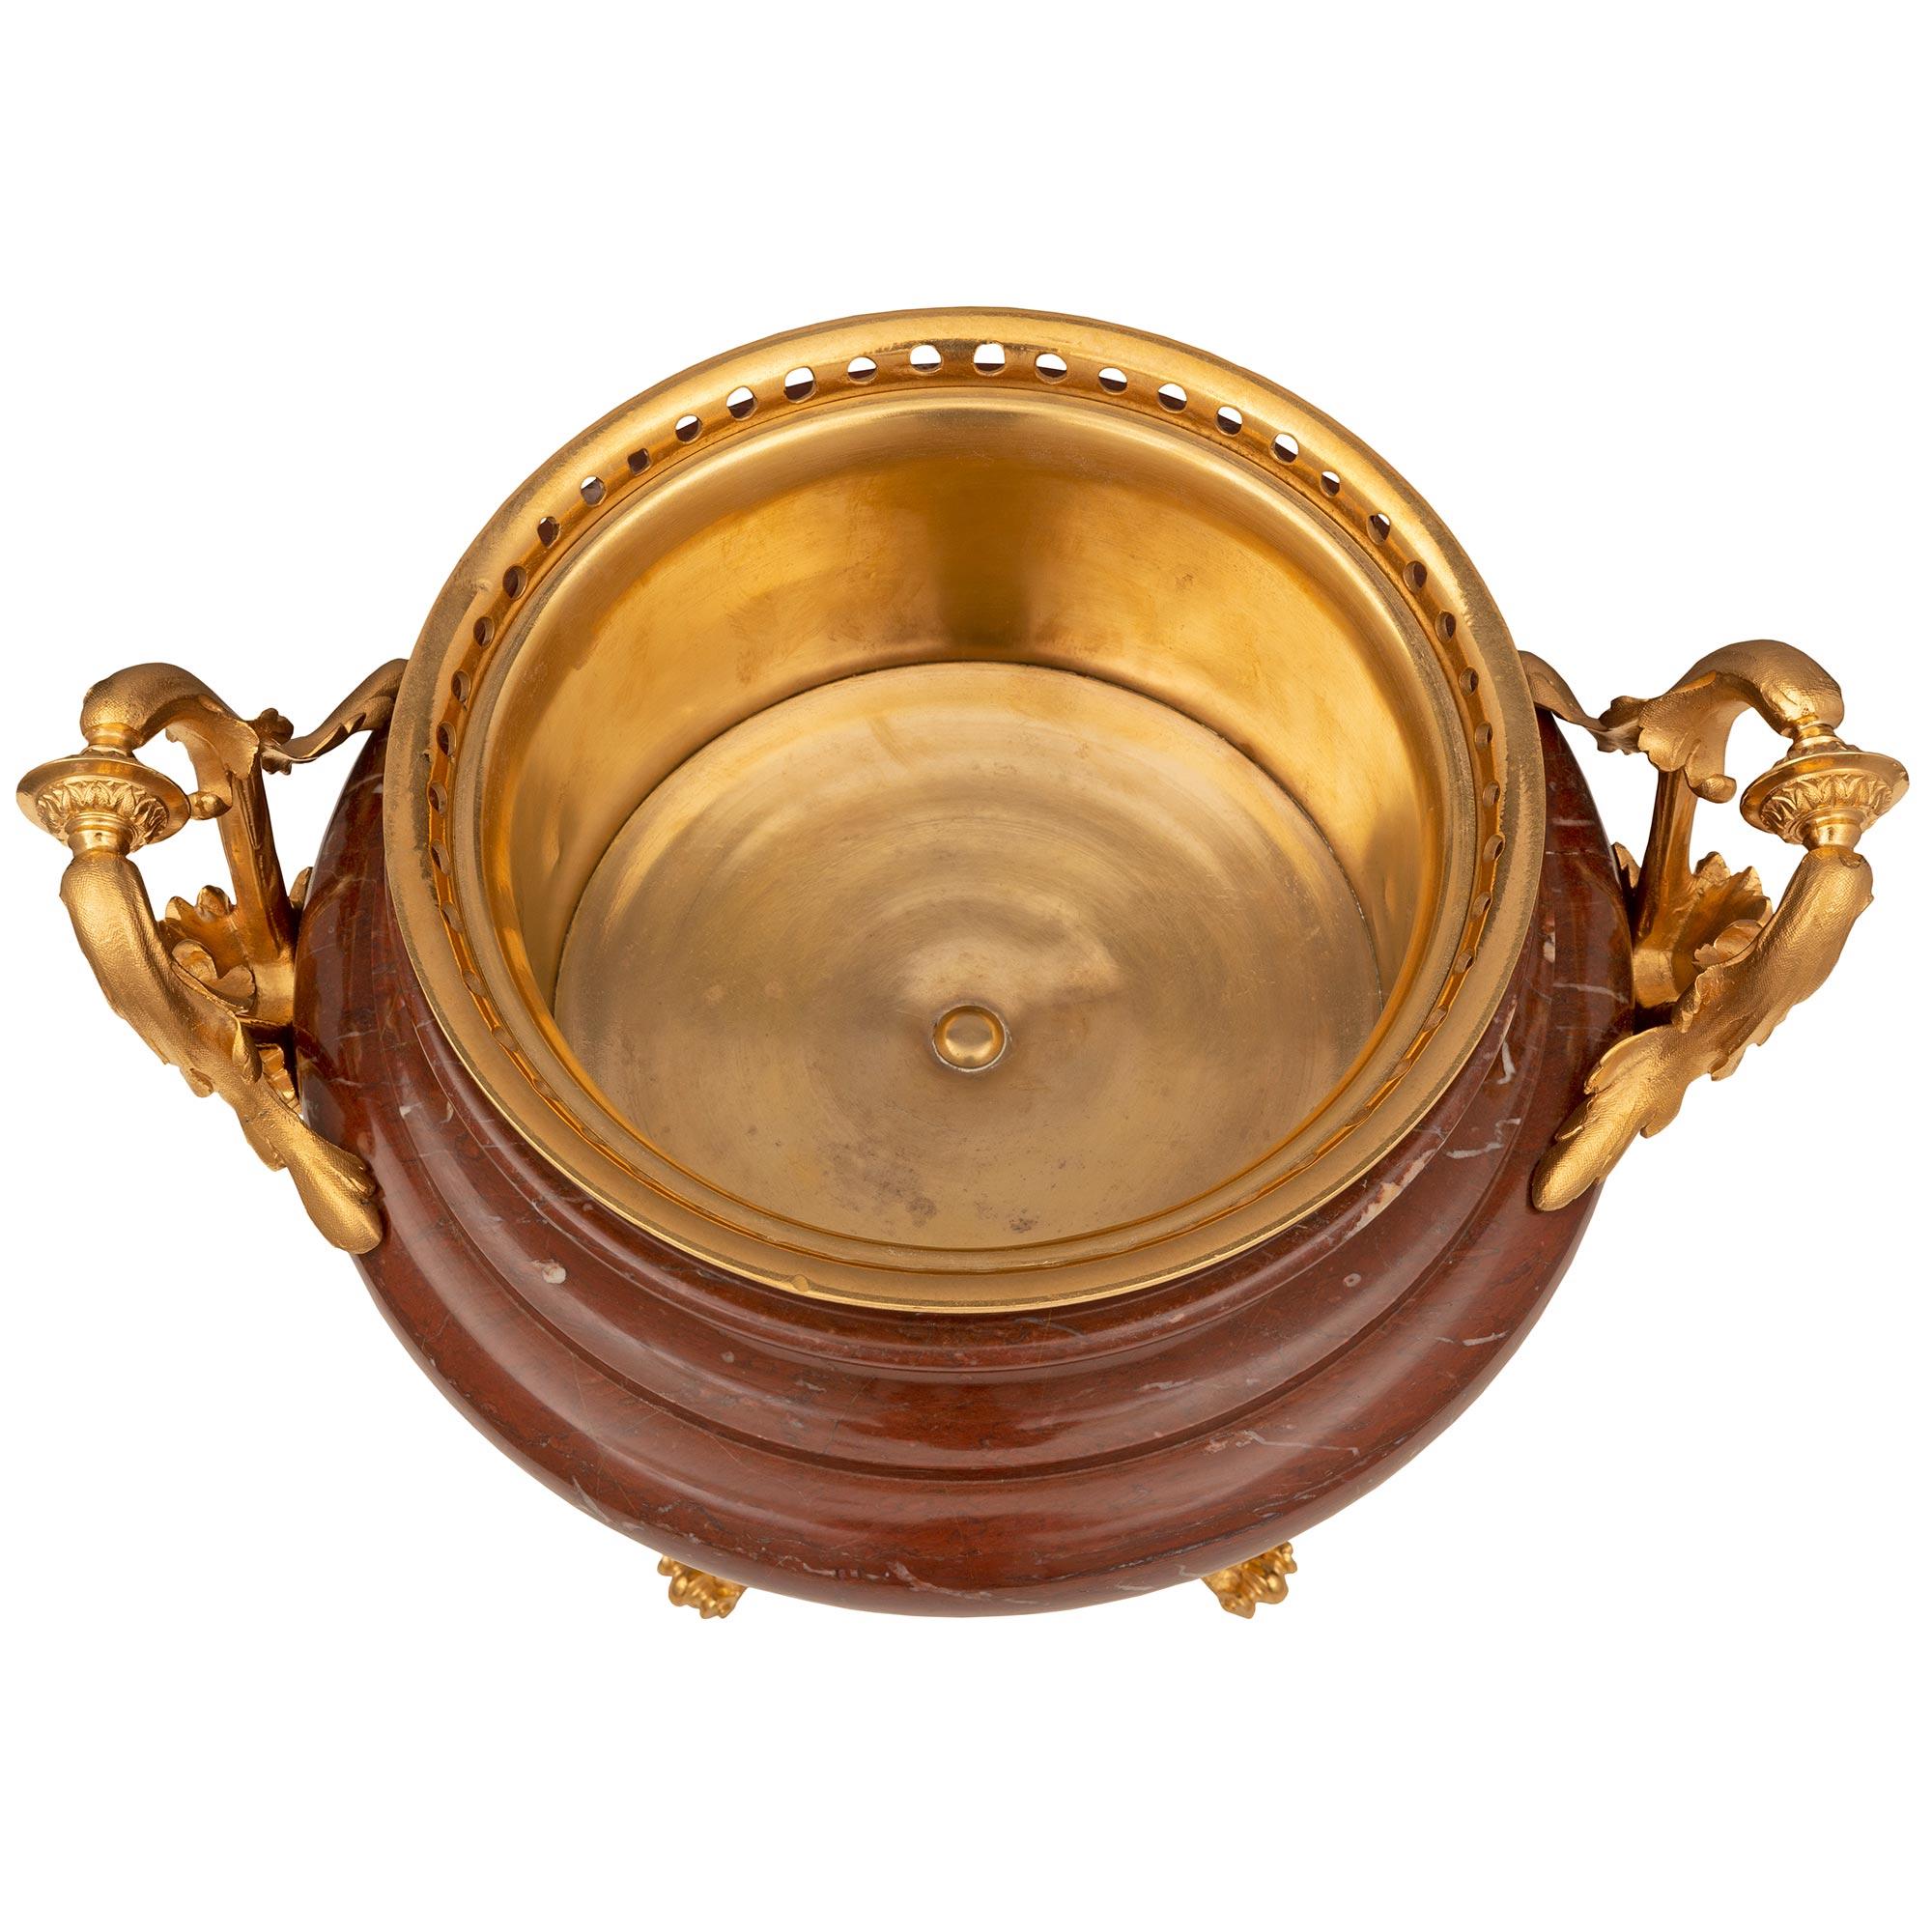 A most elegant French 19th century Louis XVI st. Belle Époque period ormolu and Rouge marble centerpiece. The centerpiece is raised by a unique and extremely decorative square base with recessed sides and finely detailed scrolled foliate ormolu